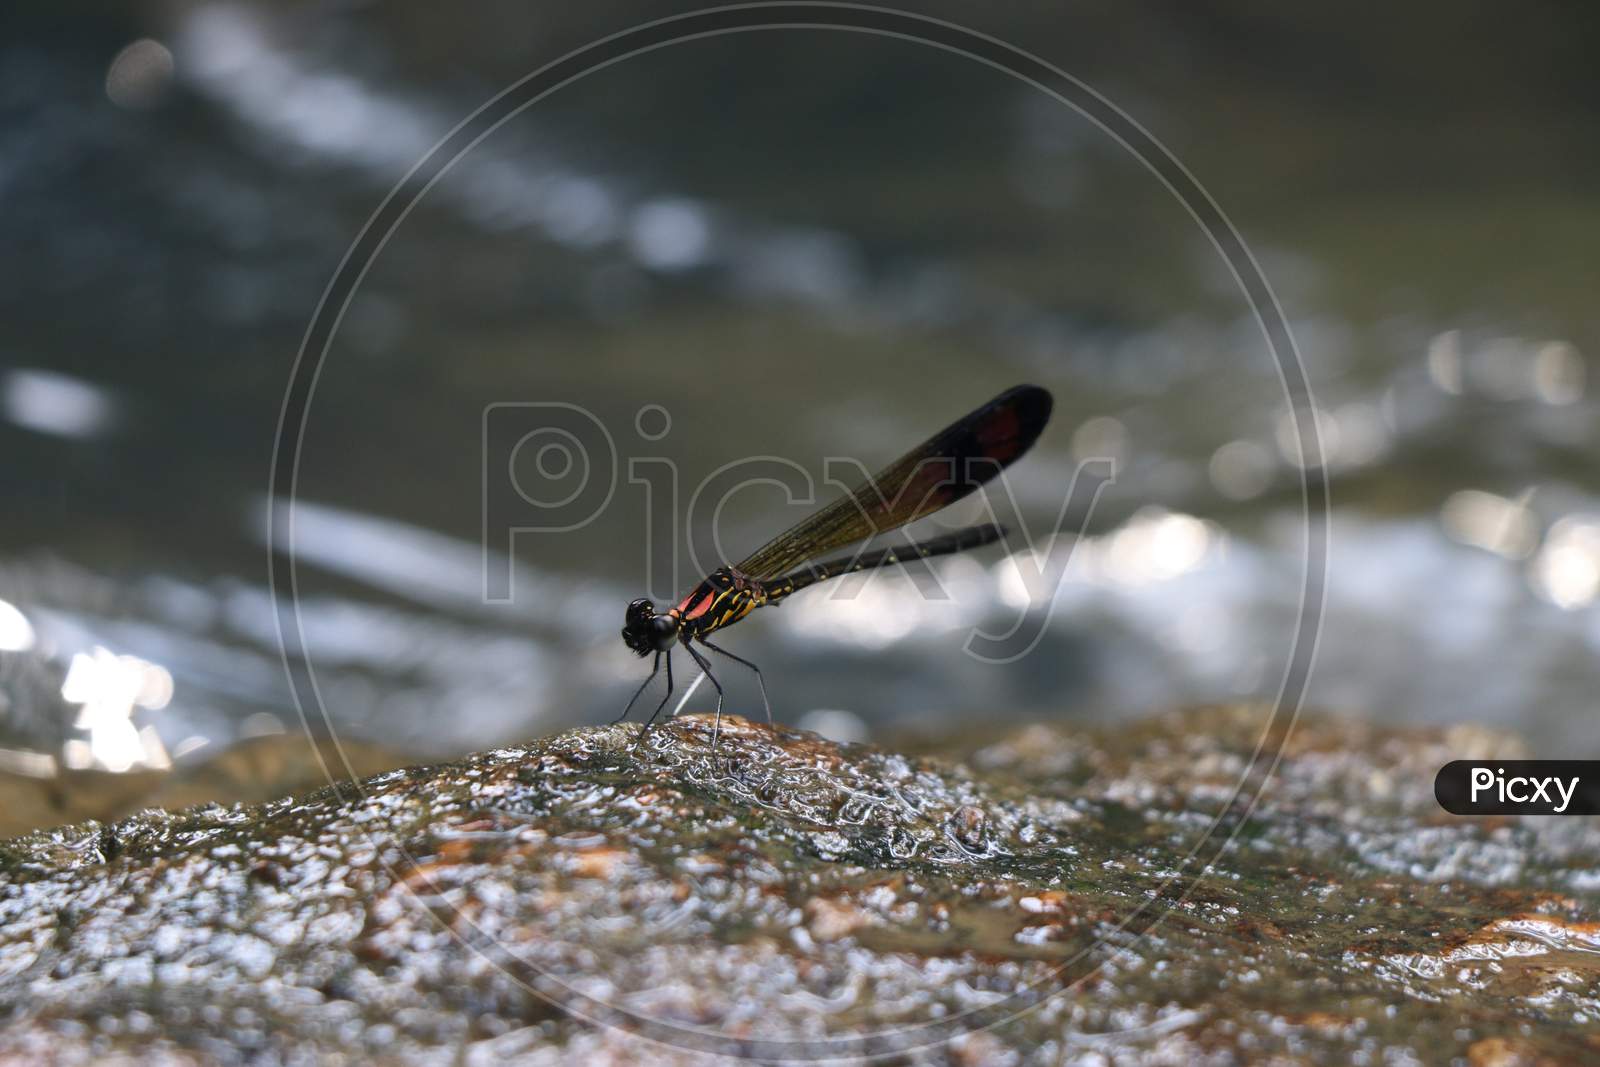 Damselfly Resting On Wet Rock Which Is Black And Brown In Color